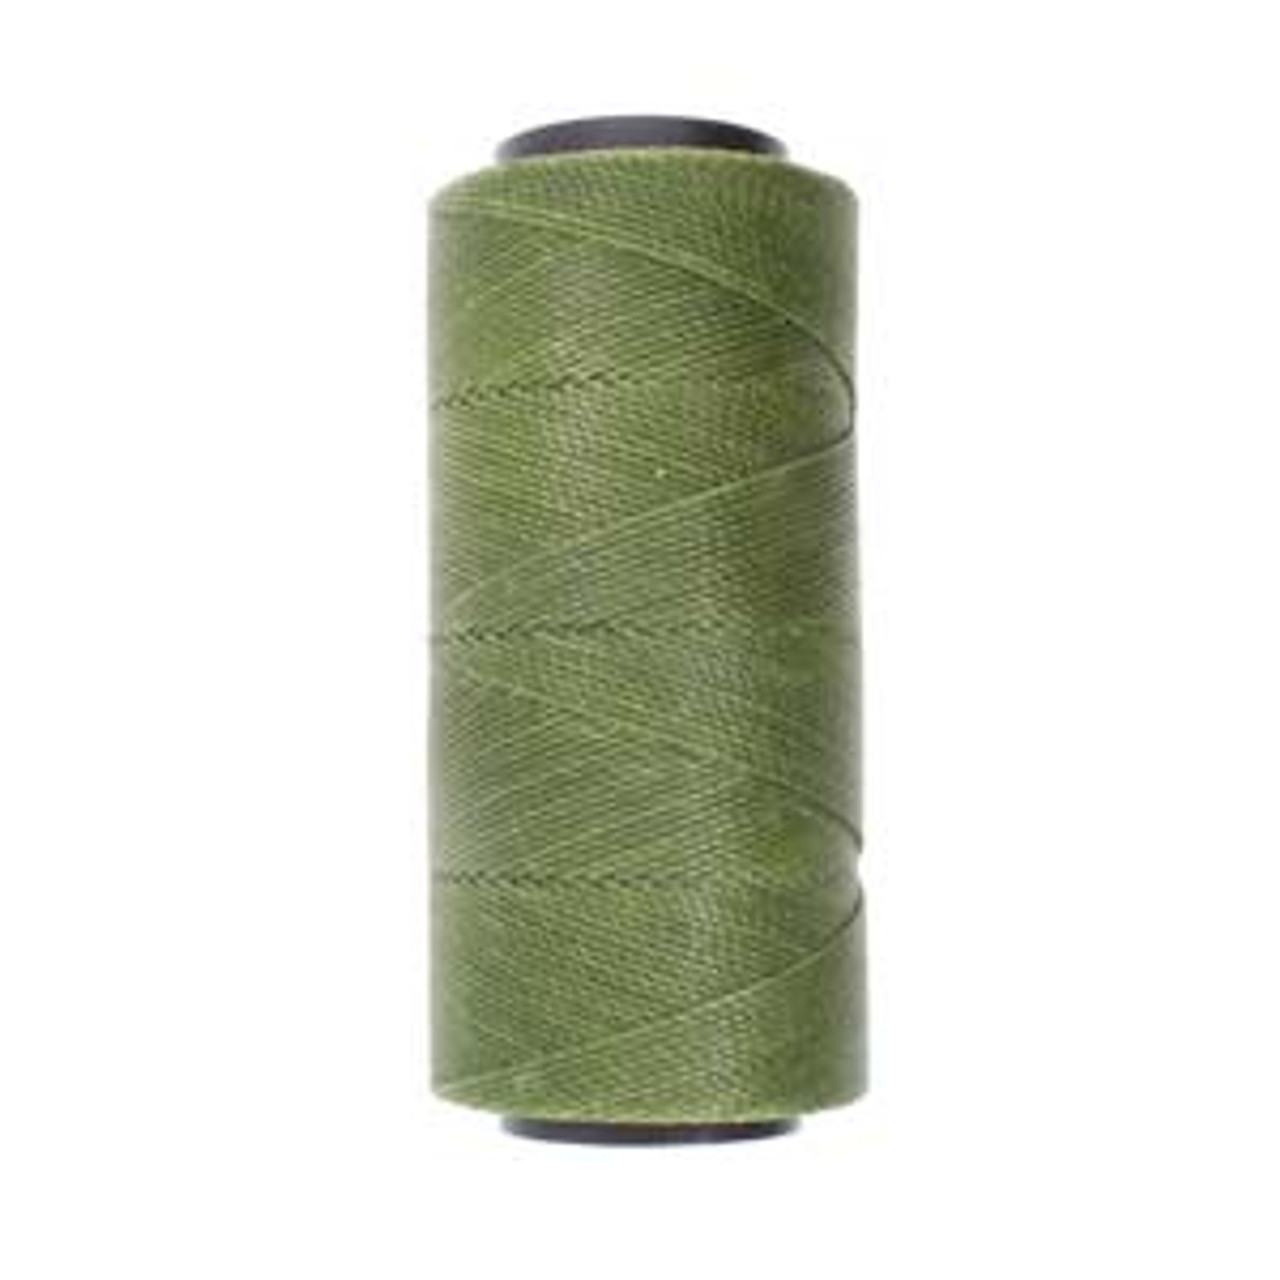 144yds 2 ply Olive  Waxed Brazilian Cord